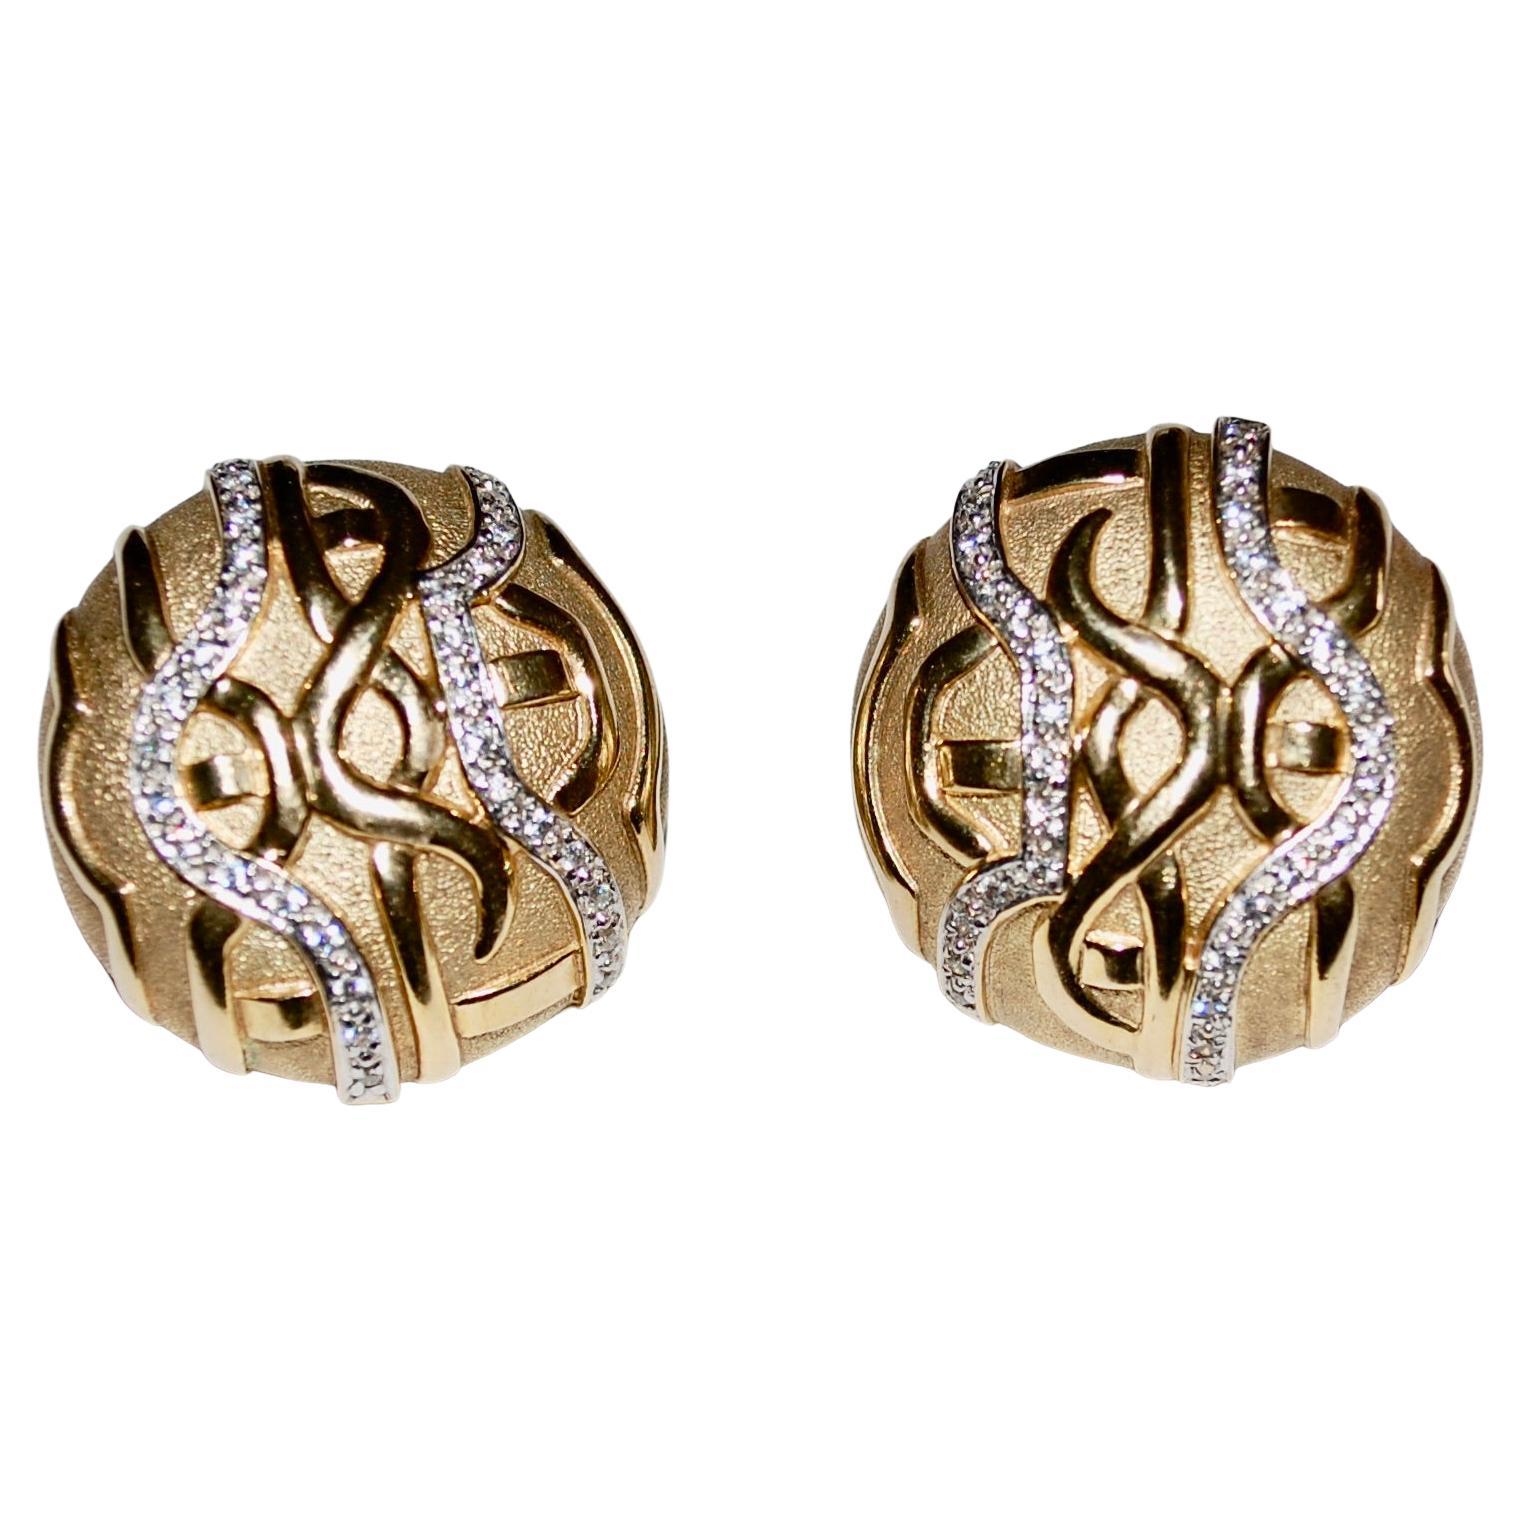 Vintage stunning clip on earrings, gold marked JC 9K Gold CZ, for Cubic Zirconia. 
Of circular outline in polished and textured gold, enhanced by undulating lines of circular-cut cubic zirconia. About 1 inch round weight about 23.3 grams.